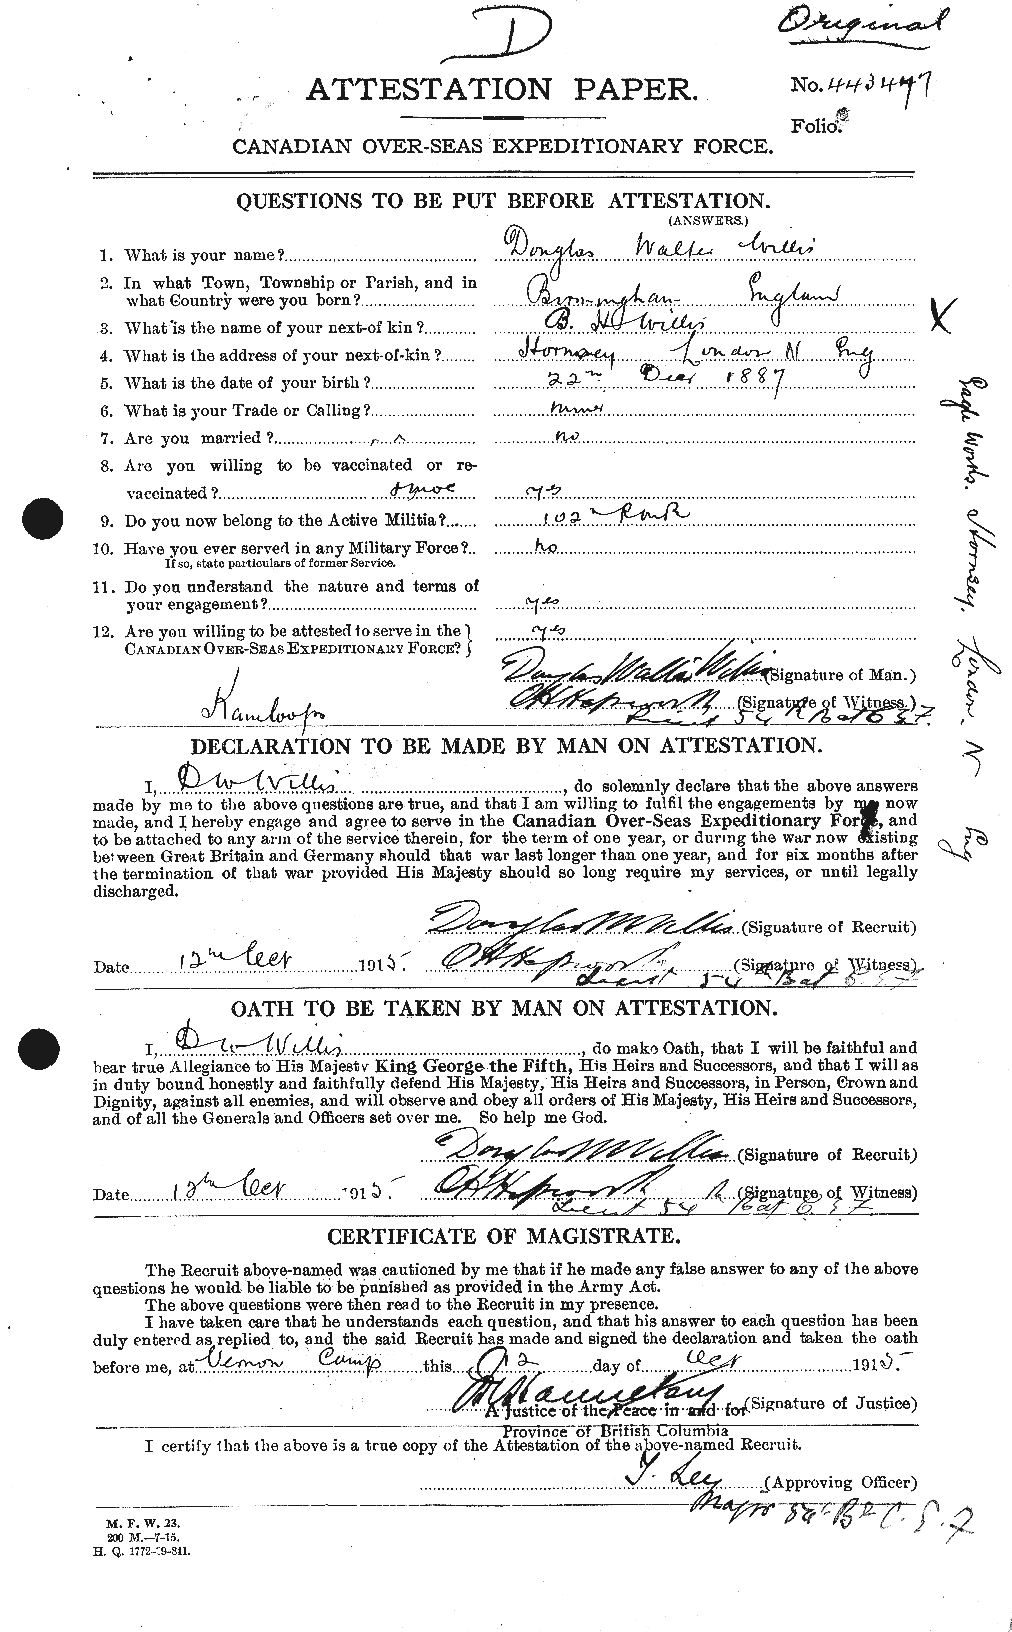 Personnel Records of the First World War - CEF 676406a